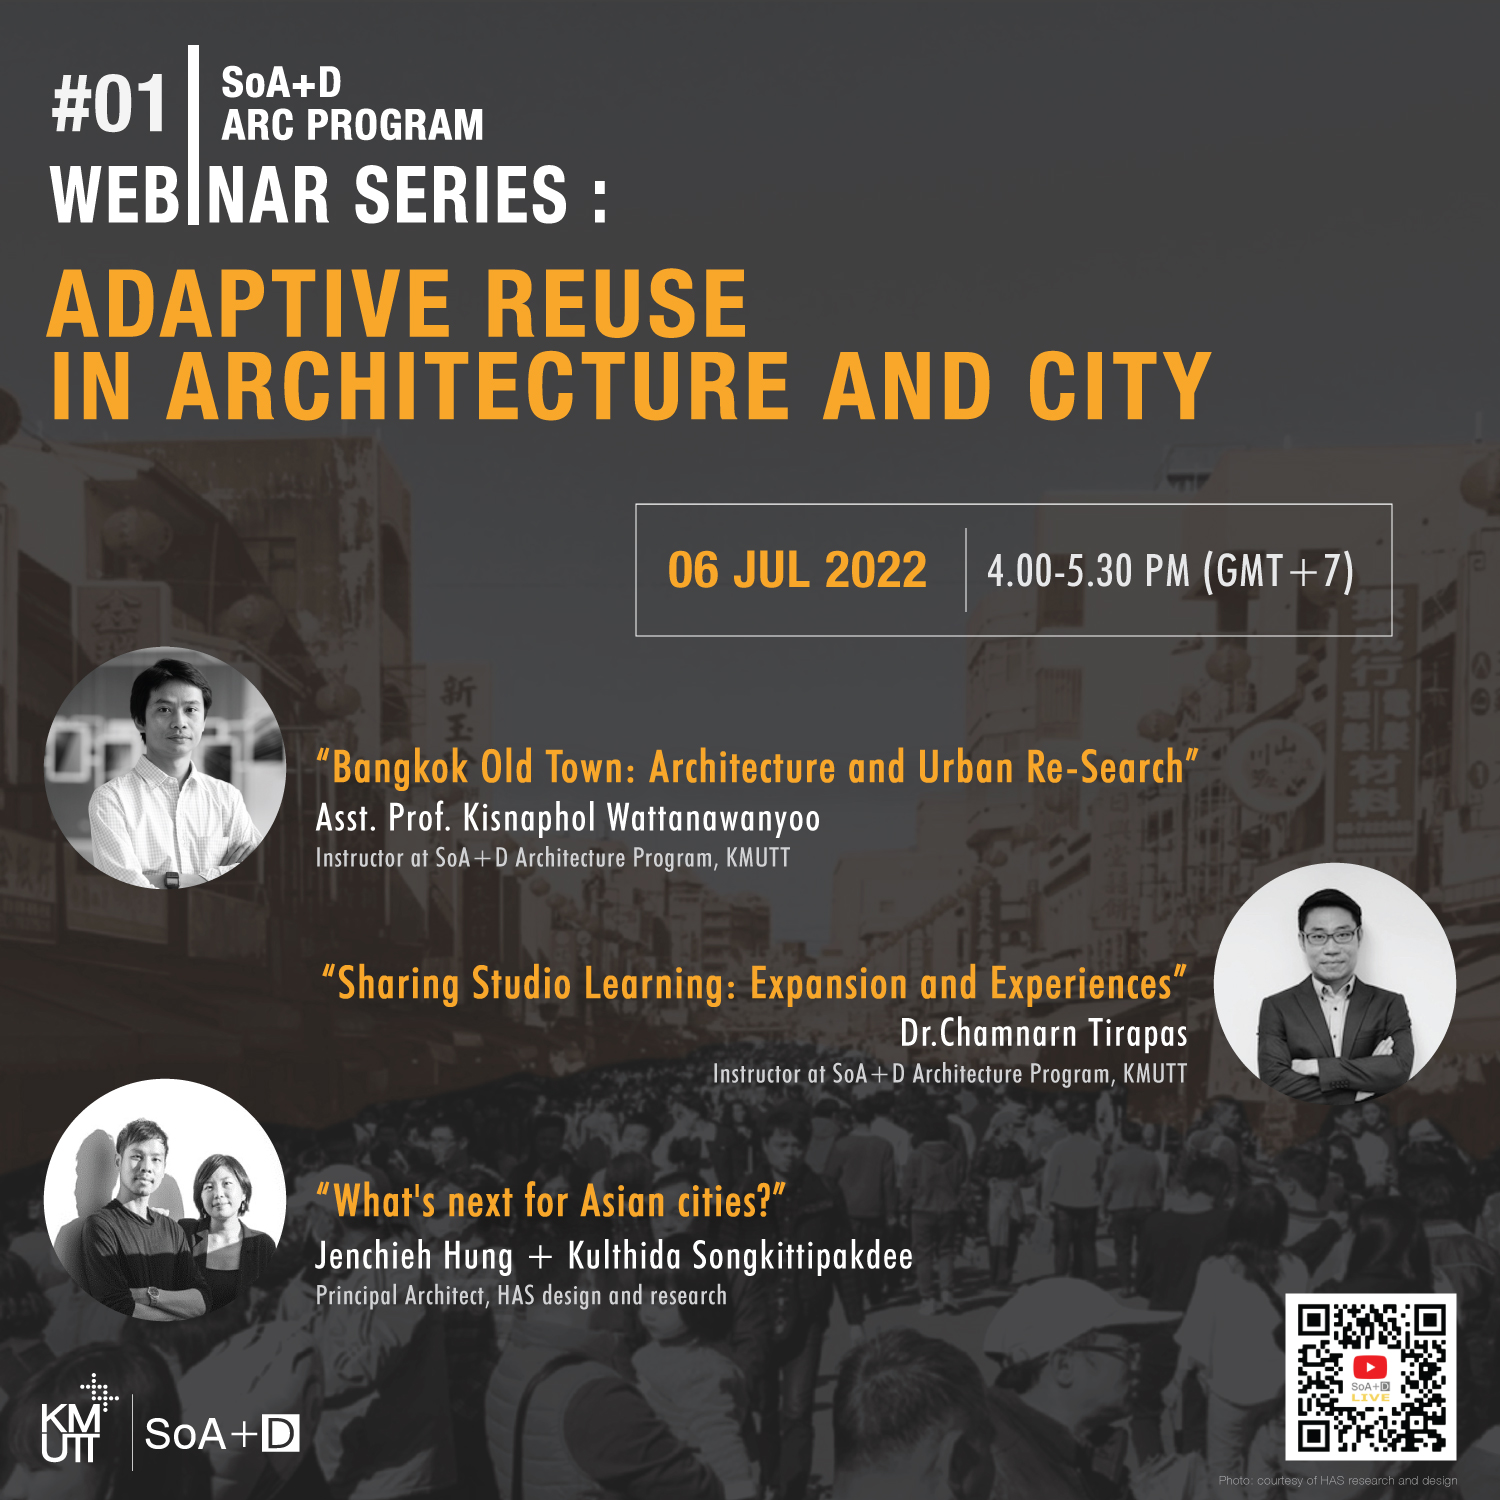 Webinar #01 on ‘Adaptive Reuse in Architecture and City ‘